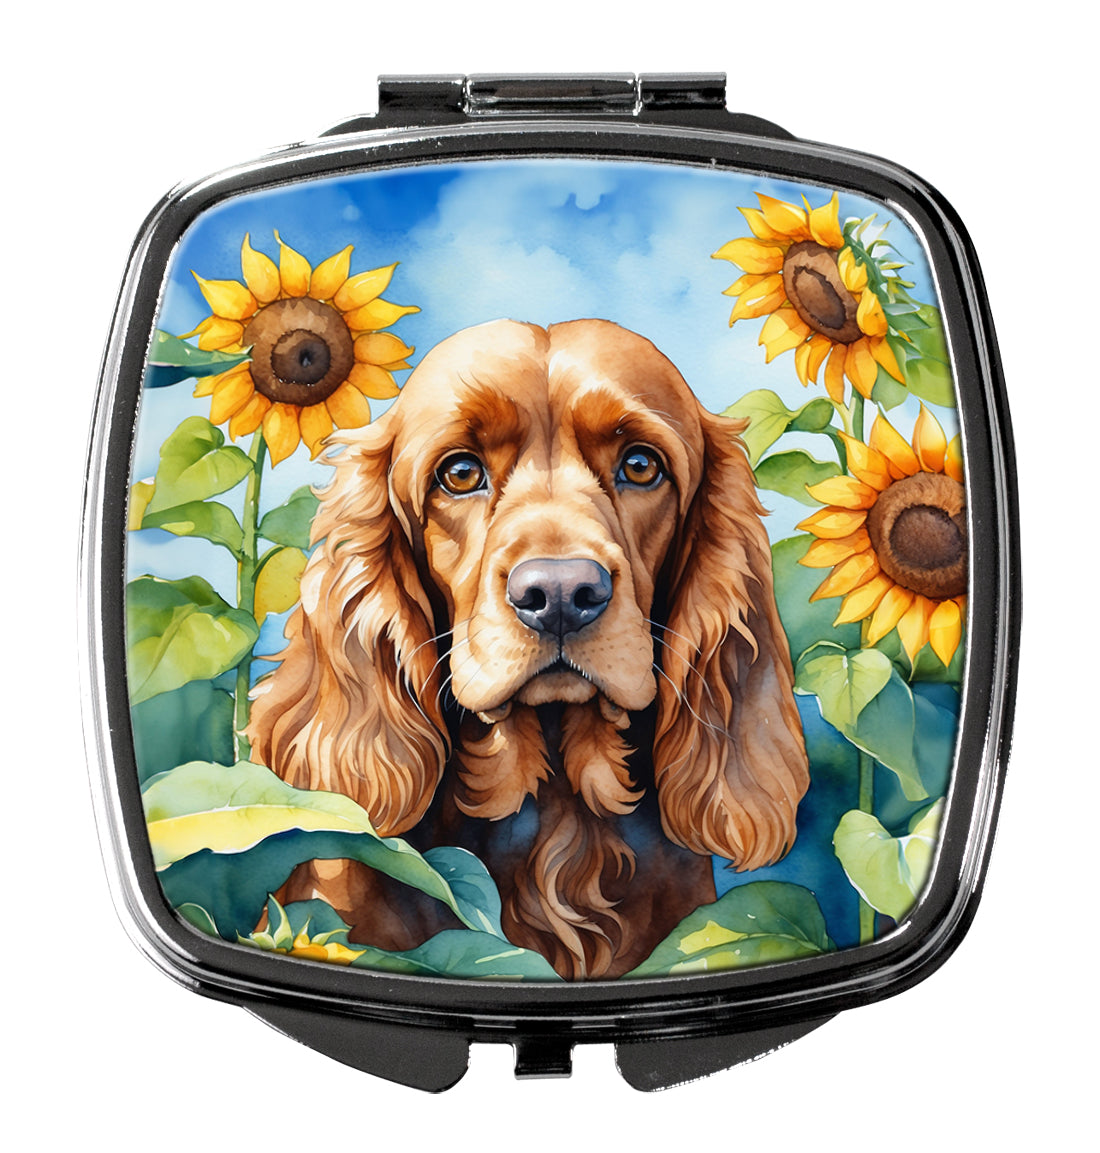 Buy this Cocker Spaniel in Sunflowers Compact Mirror